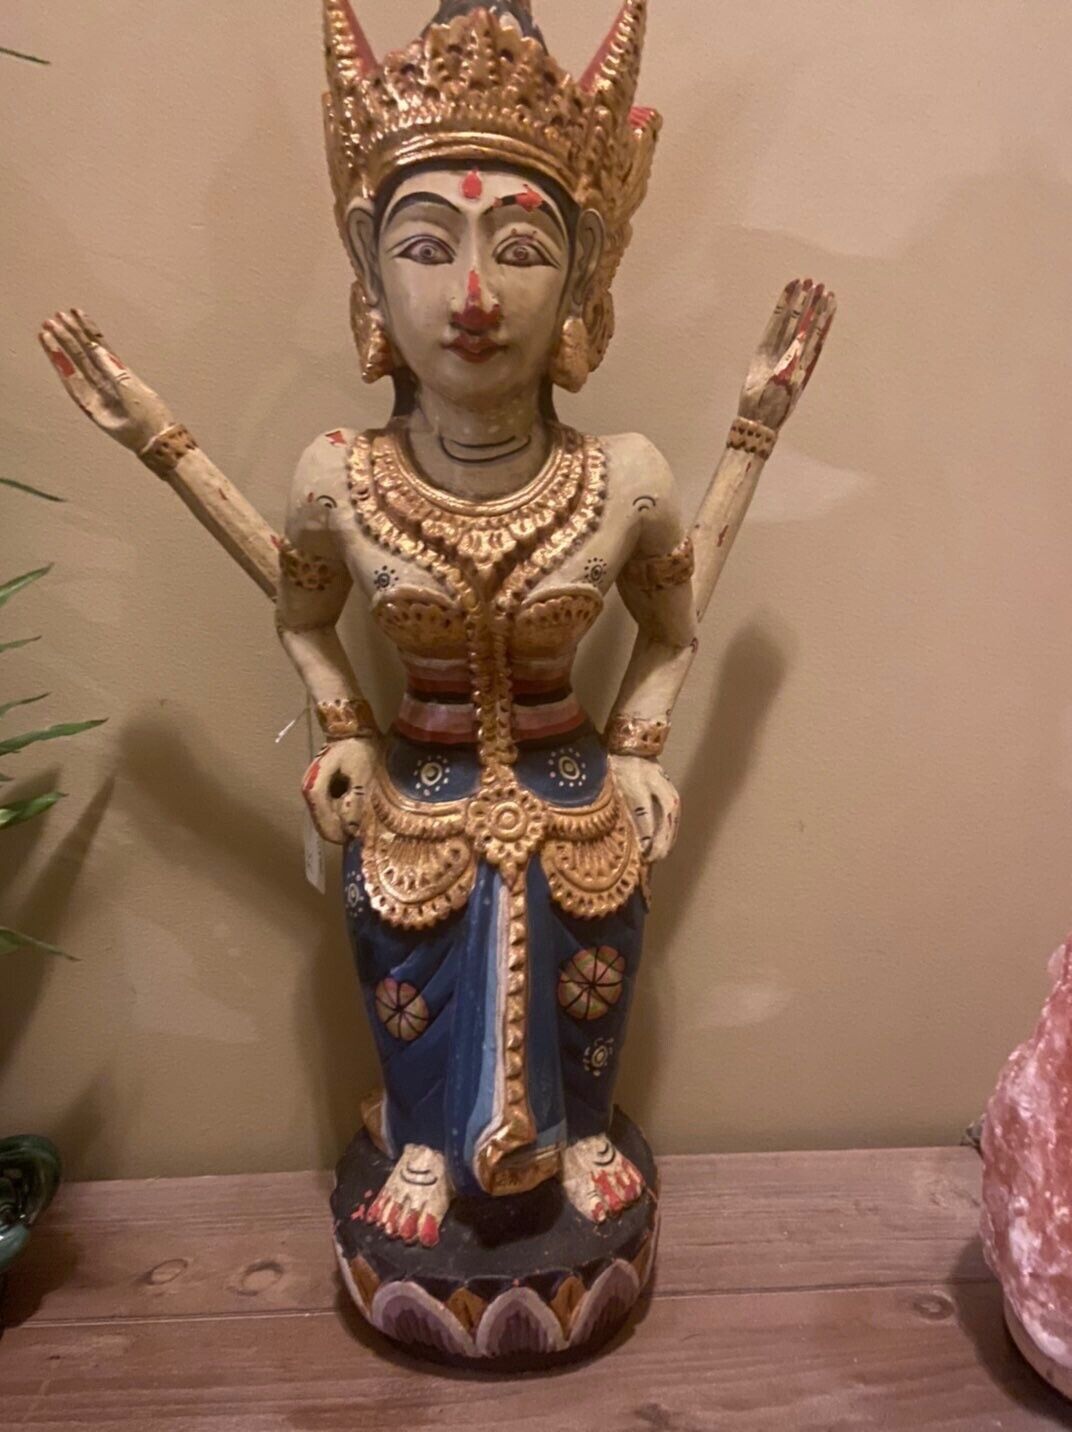 Rare Indian Goddess Statue,this item is beautifully detailed hand carved,antique